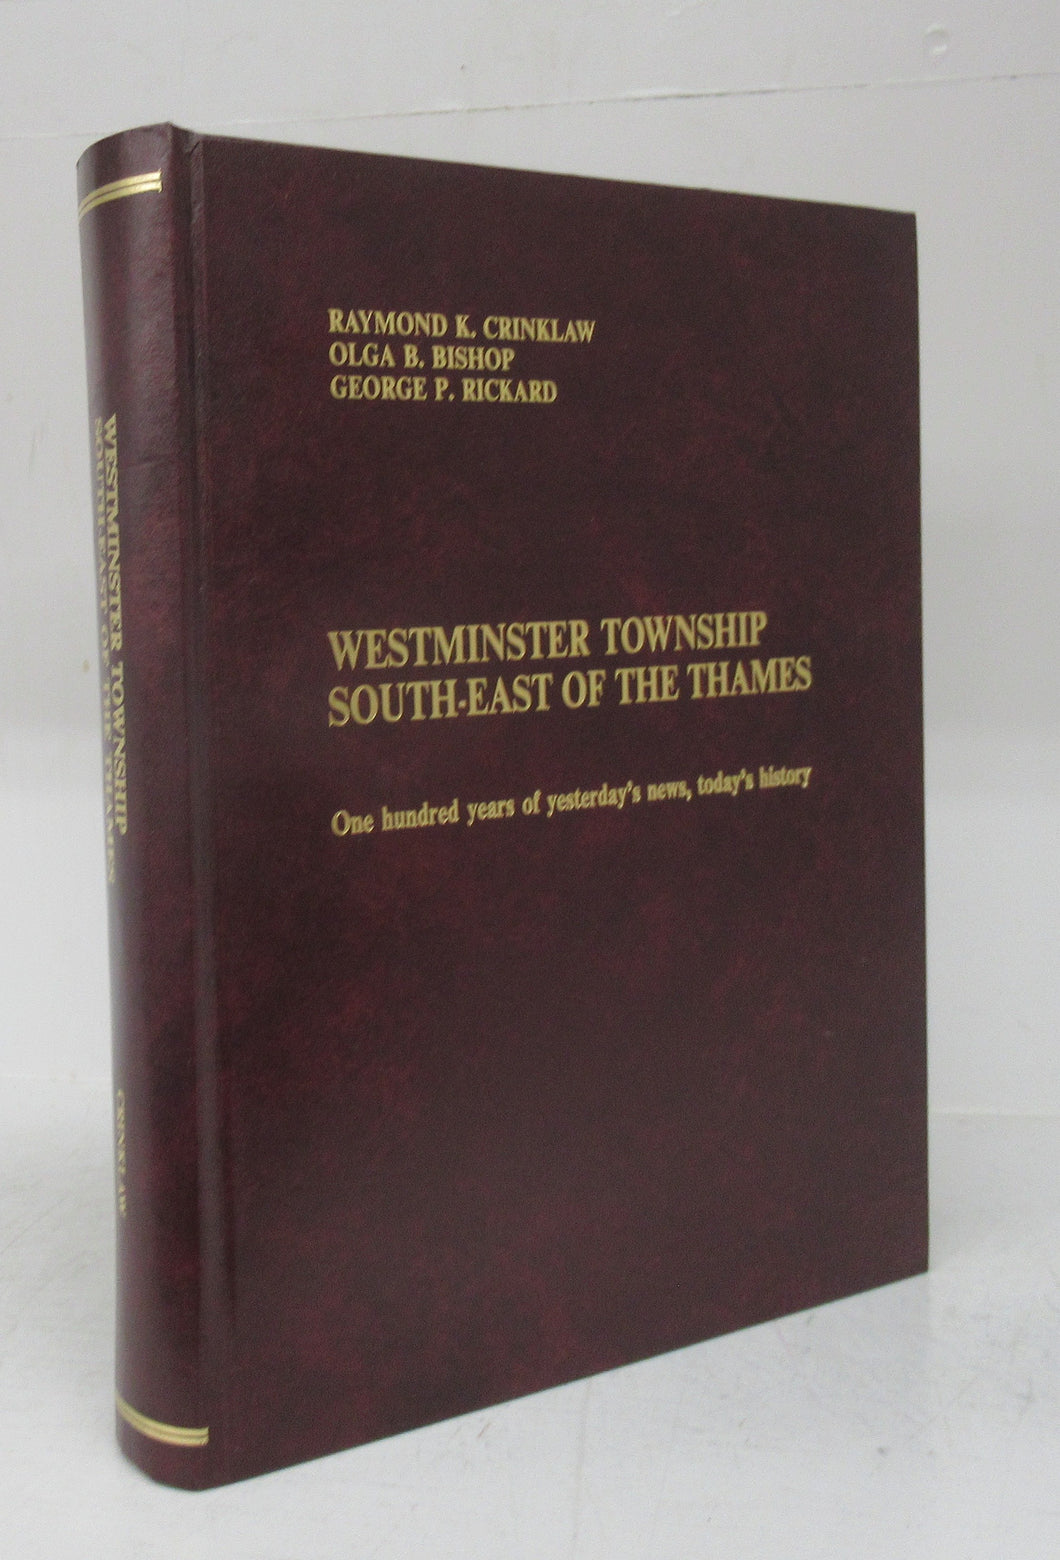 Westminster Township South-East of the Thames: One hundred years of yesterday's news, today's history